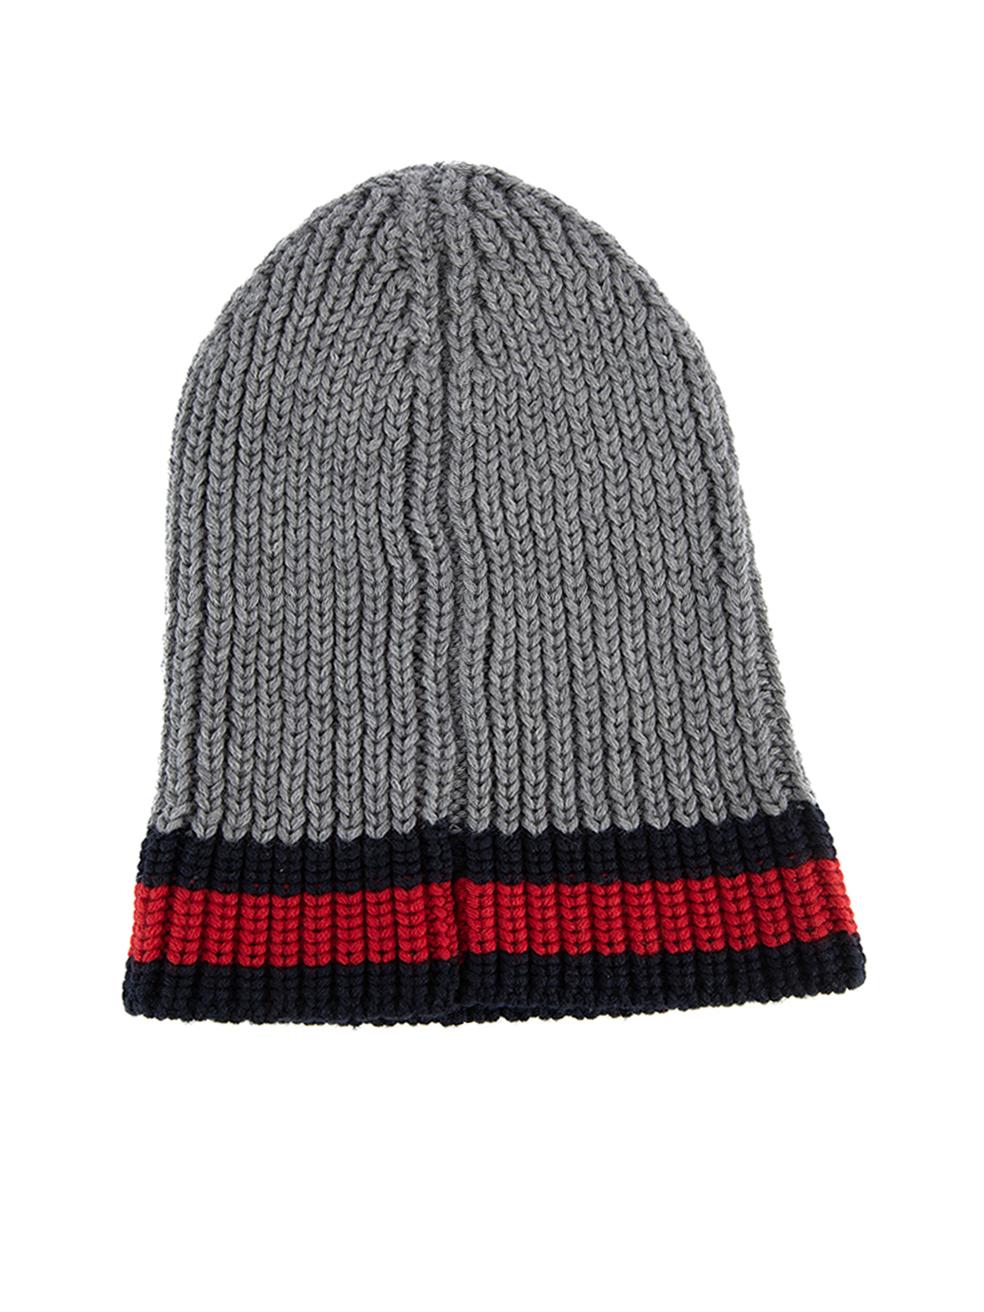 CONDITION is Never Worn. No visible wear to beanie is evident on this used Gucci designer resale item. Details Grey Wool Ribbed knit beanie Signature web stripe detailing Comes with original box Made in Italy Composition 100% Wool Care instructions: